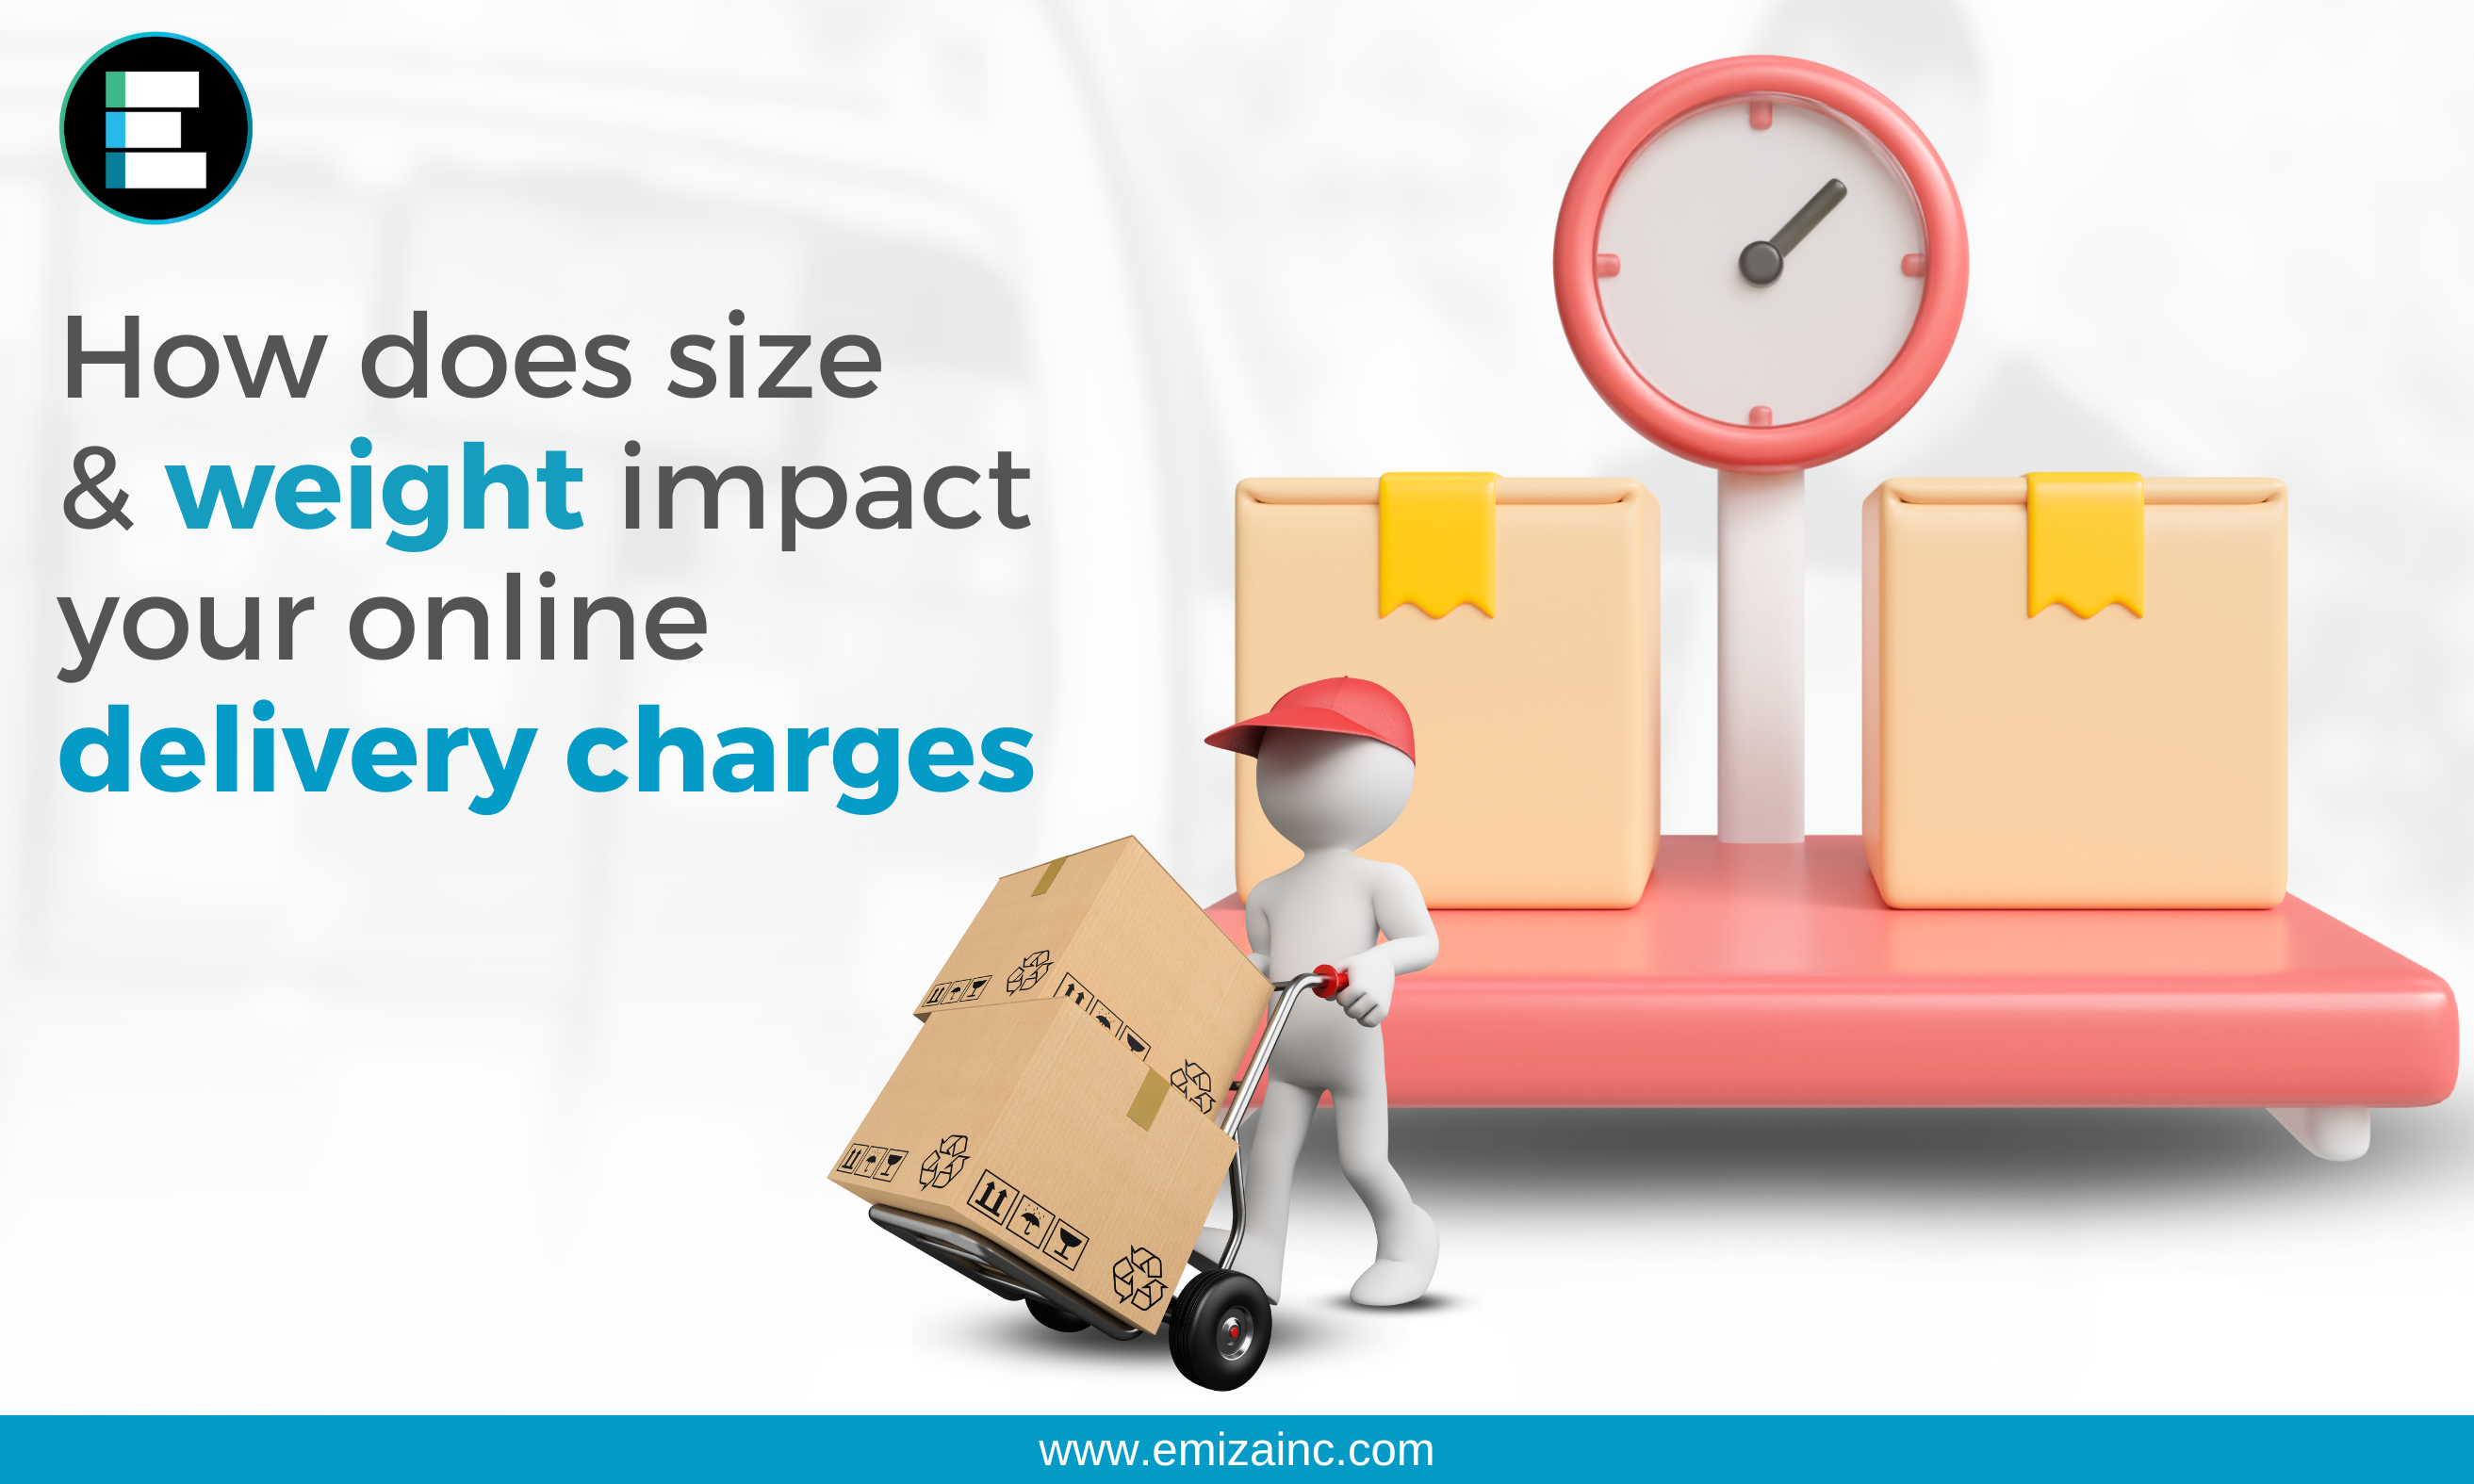 How size and weight impact your online delivery charges